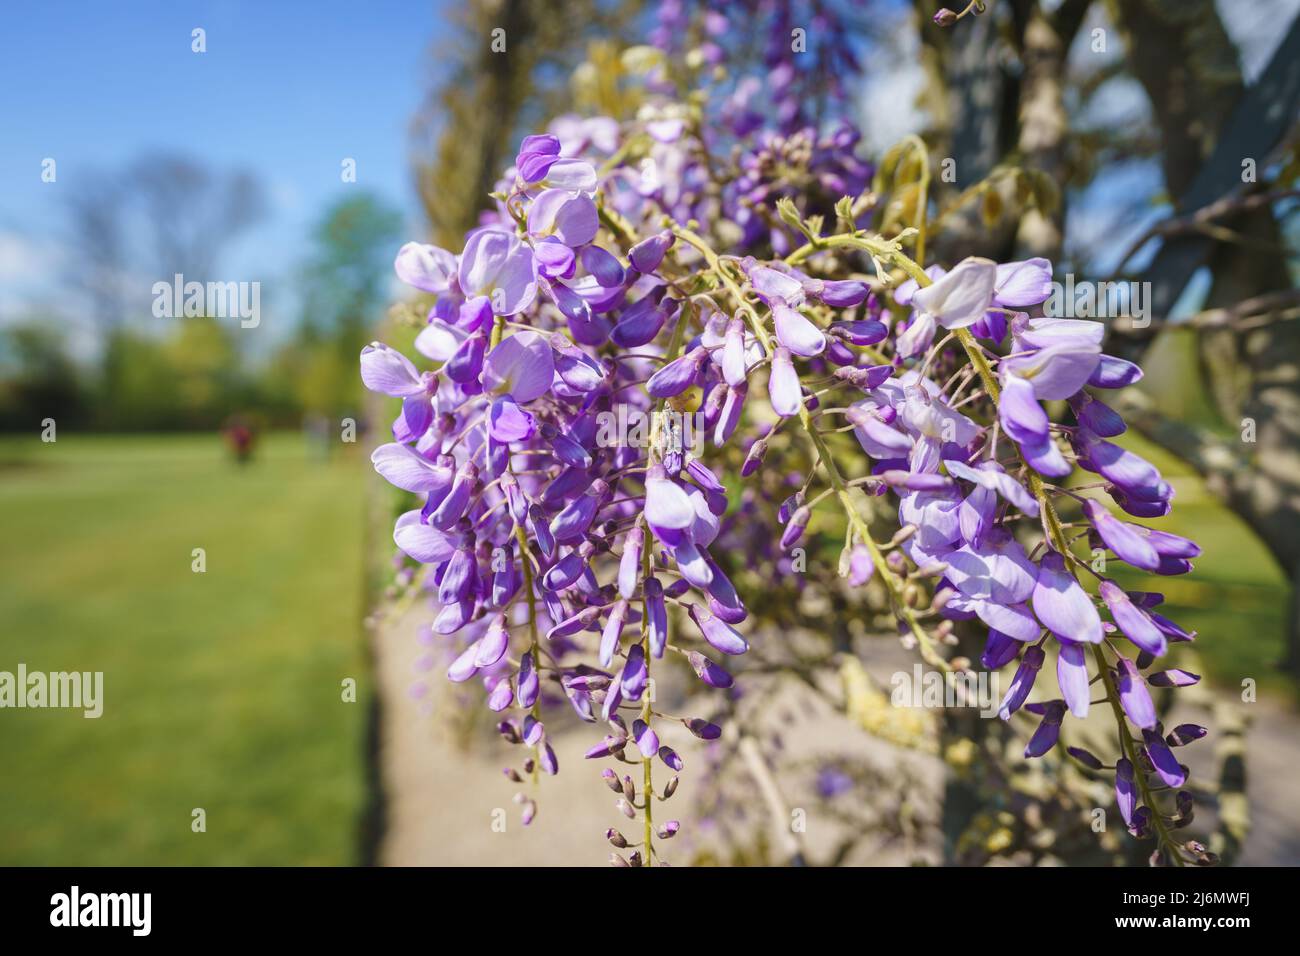 Close up view of wisteria flowers Stock Photo